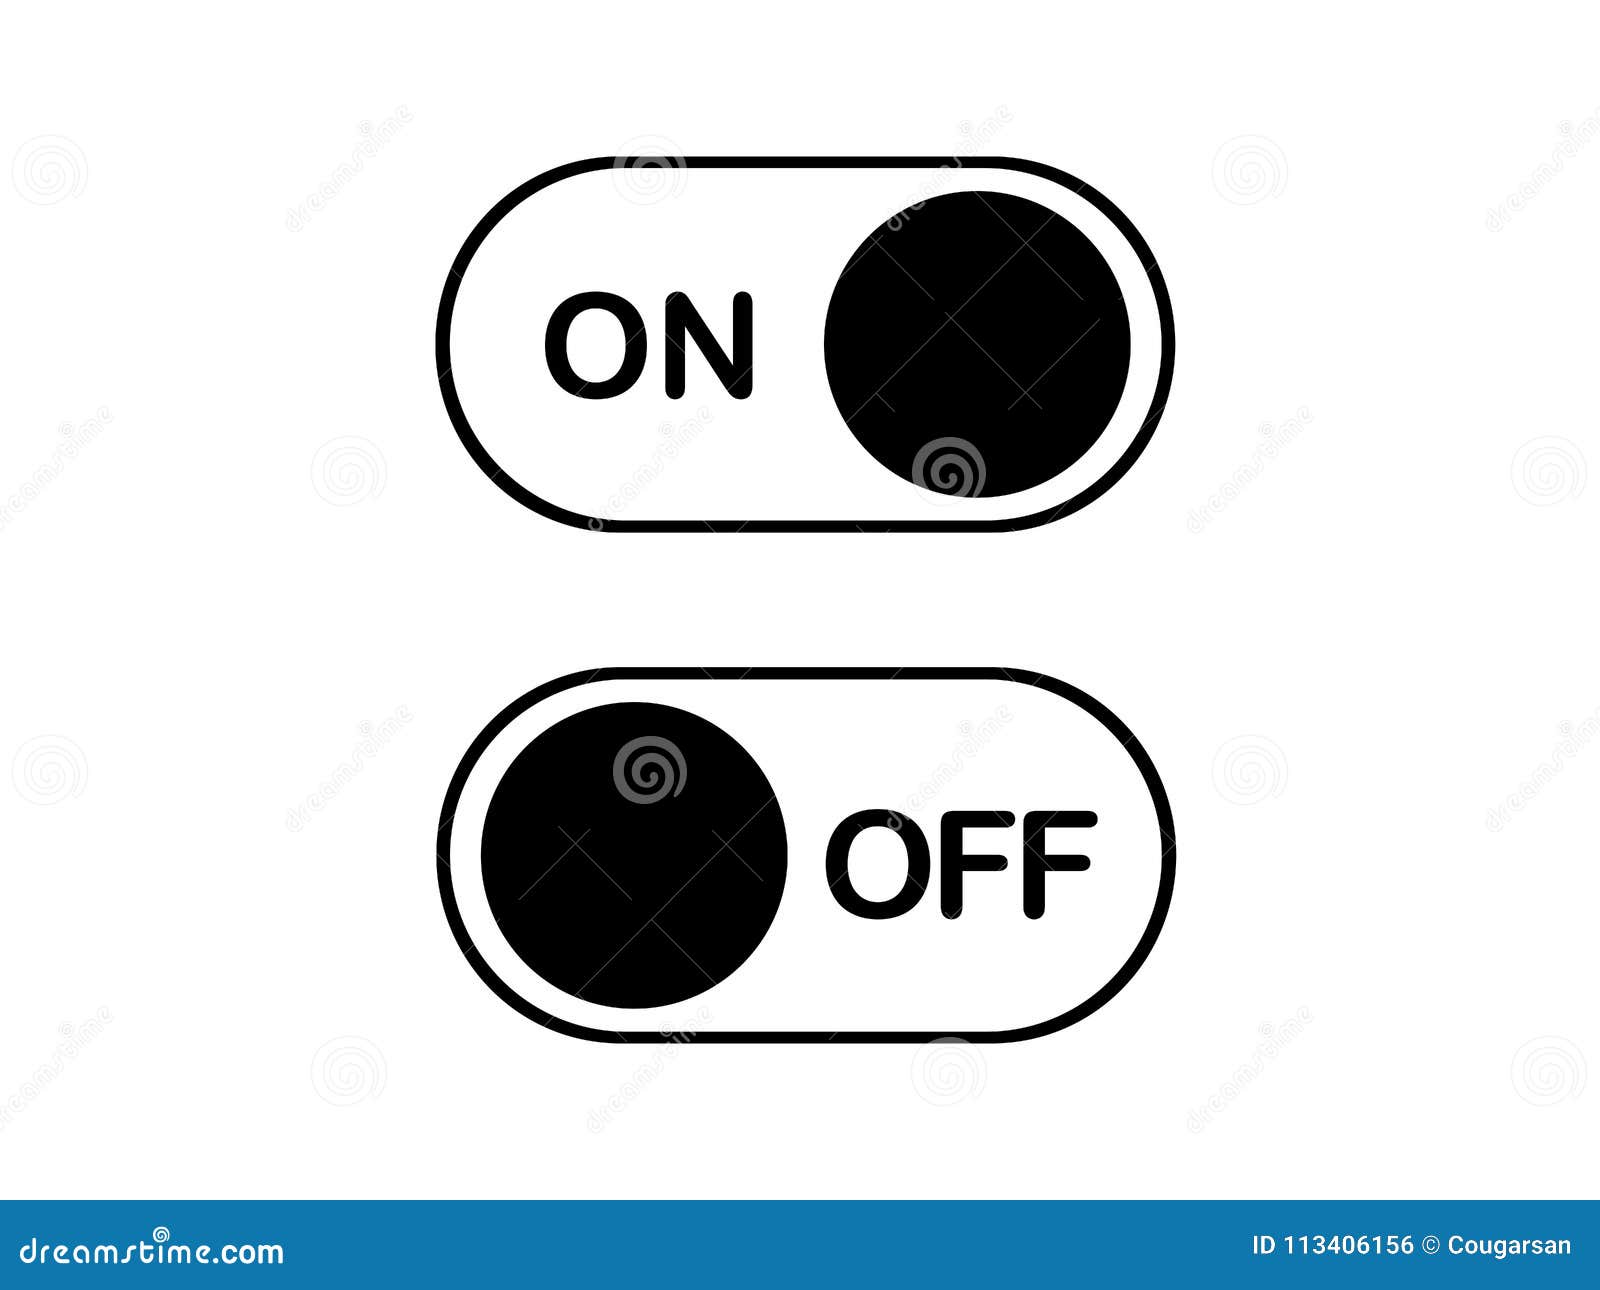 Download Vector Simple Flat Icon On And Off Toggle Switch Button Stock Vector Illustration Of Responsive Operating 113406156